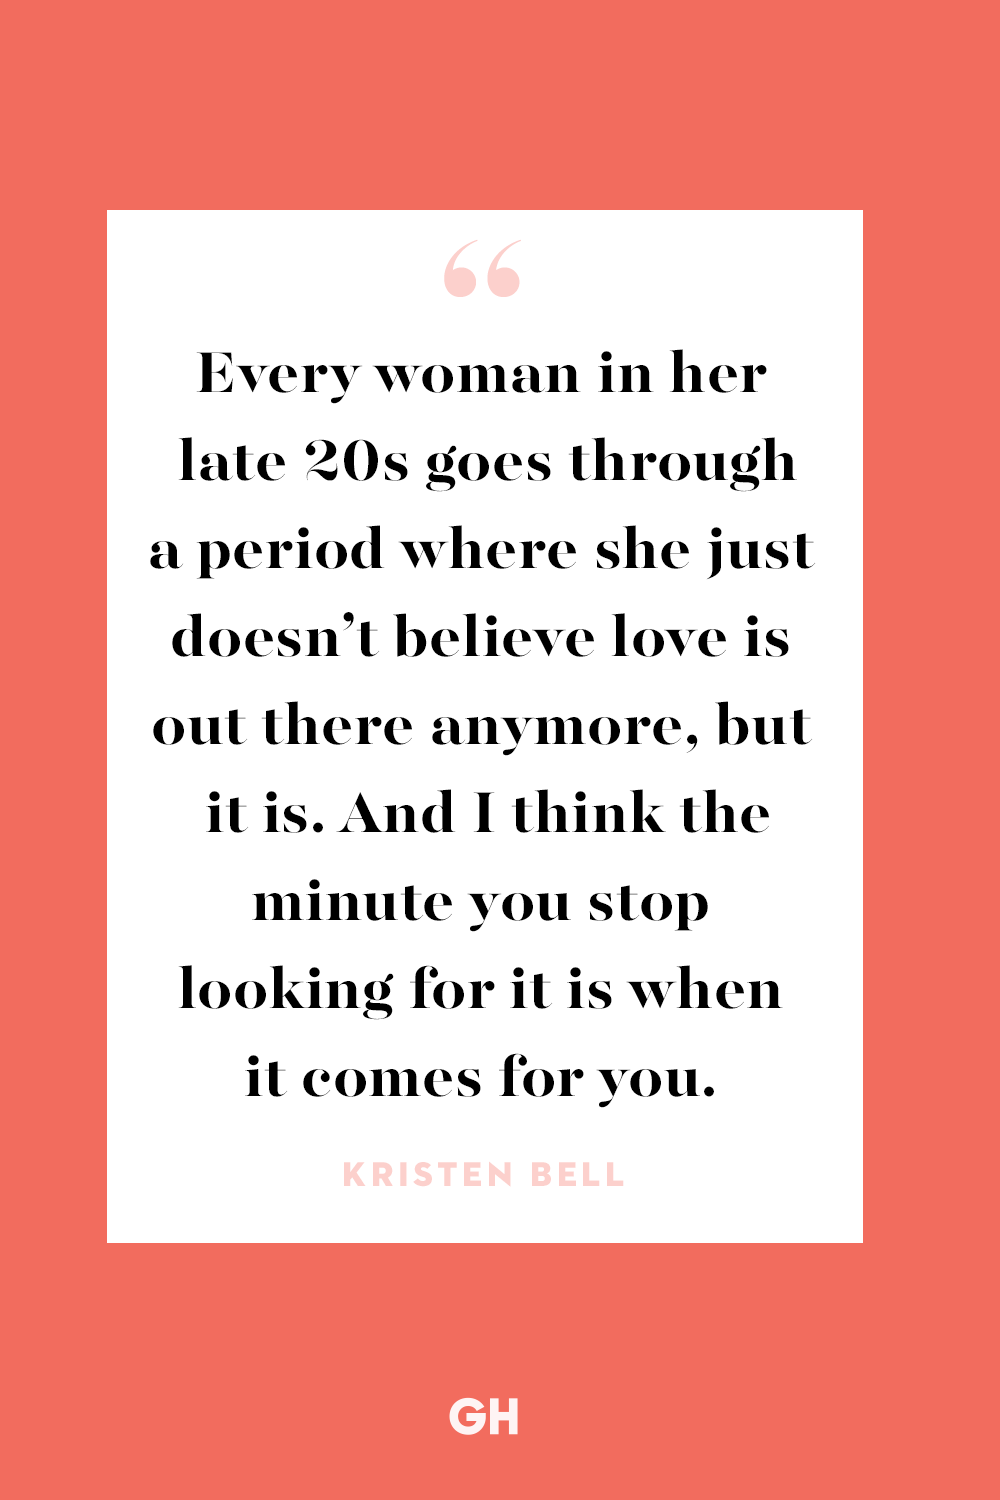 52 Best Being Single Quotes - Powerful Sayings For Single People